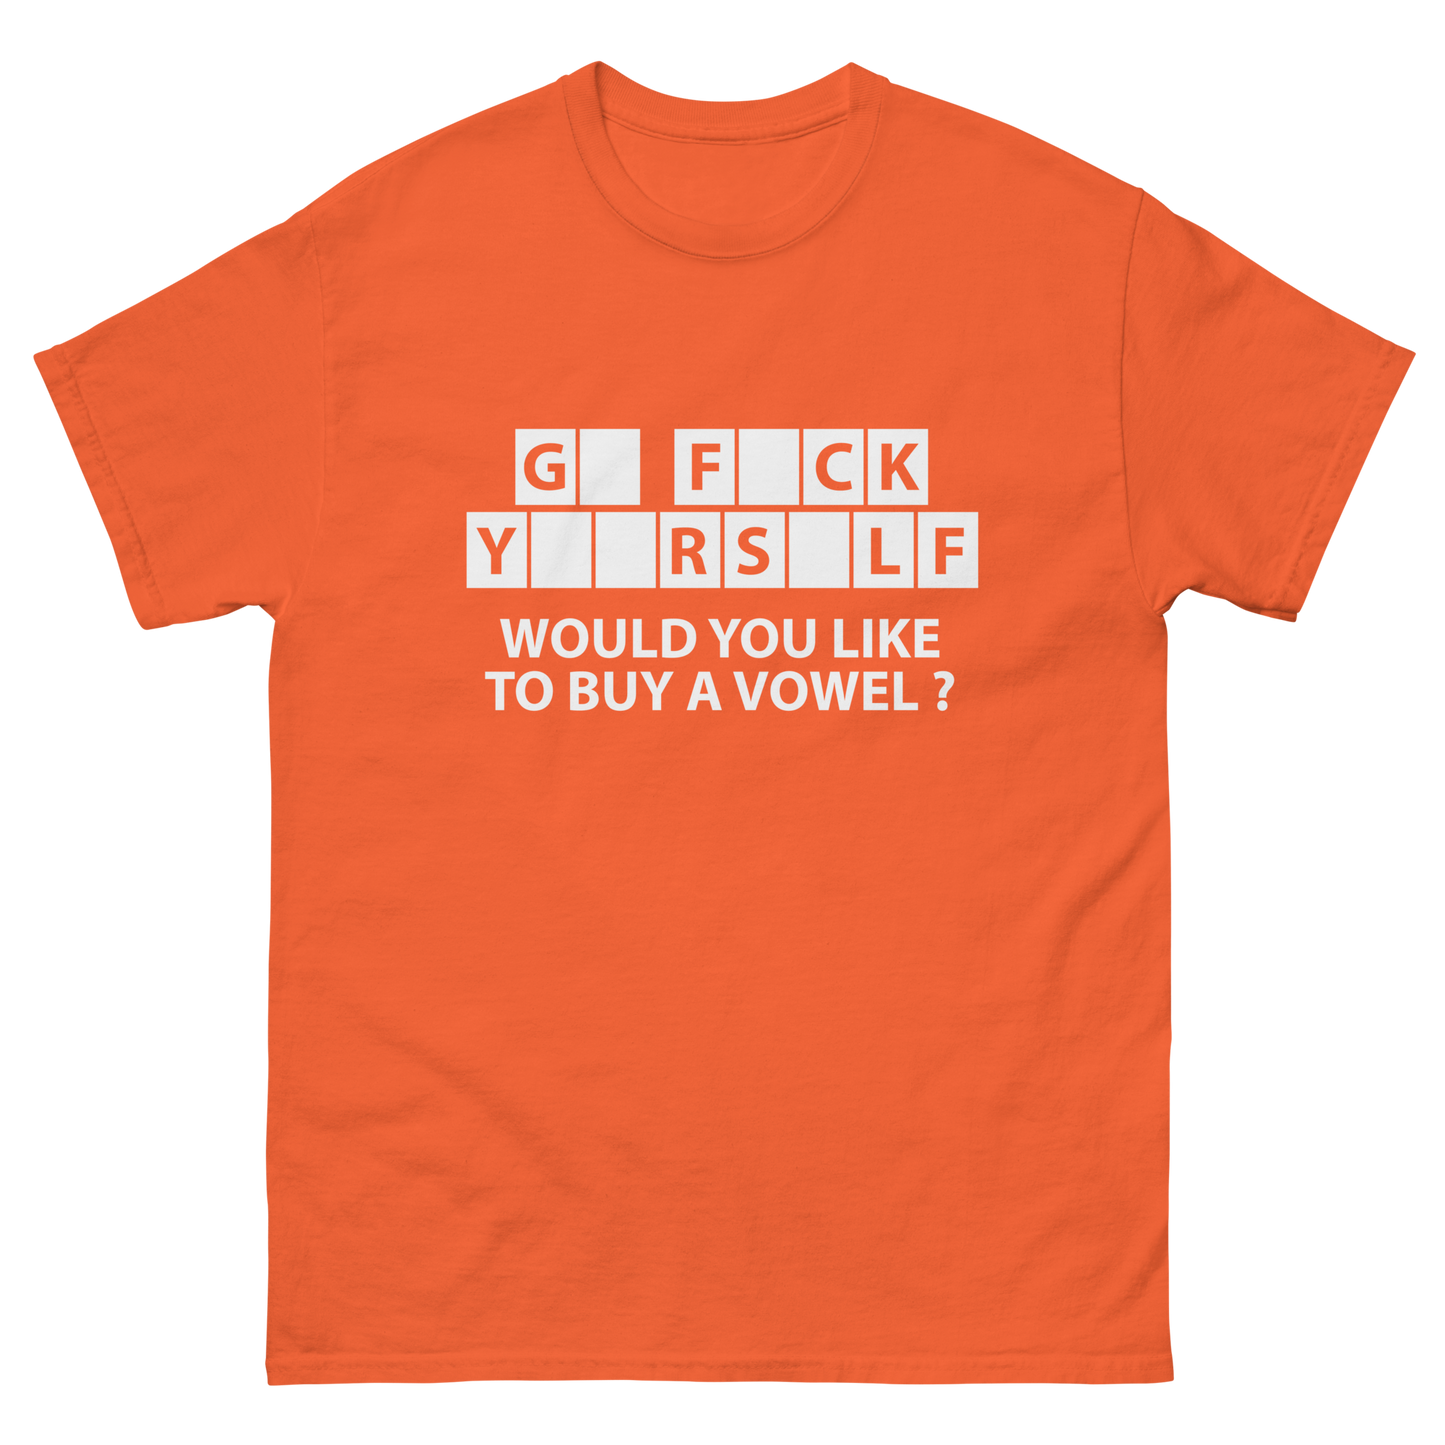 Go F*ck Yourself Would You Like To Buy A Vowel T-Shirt